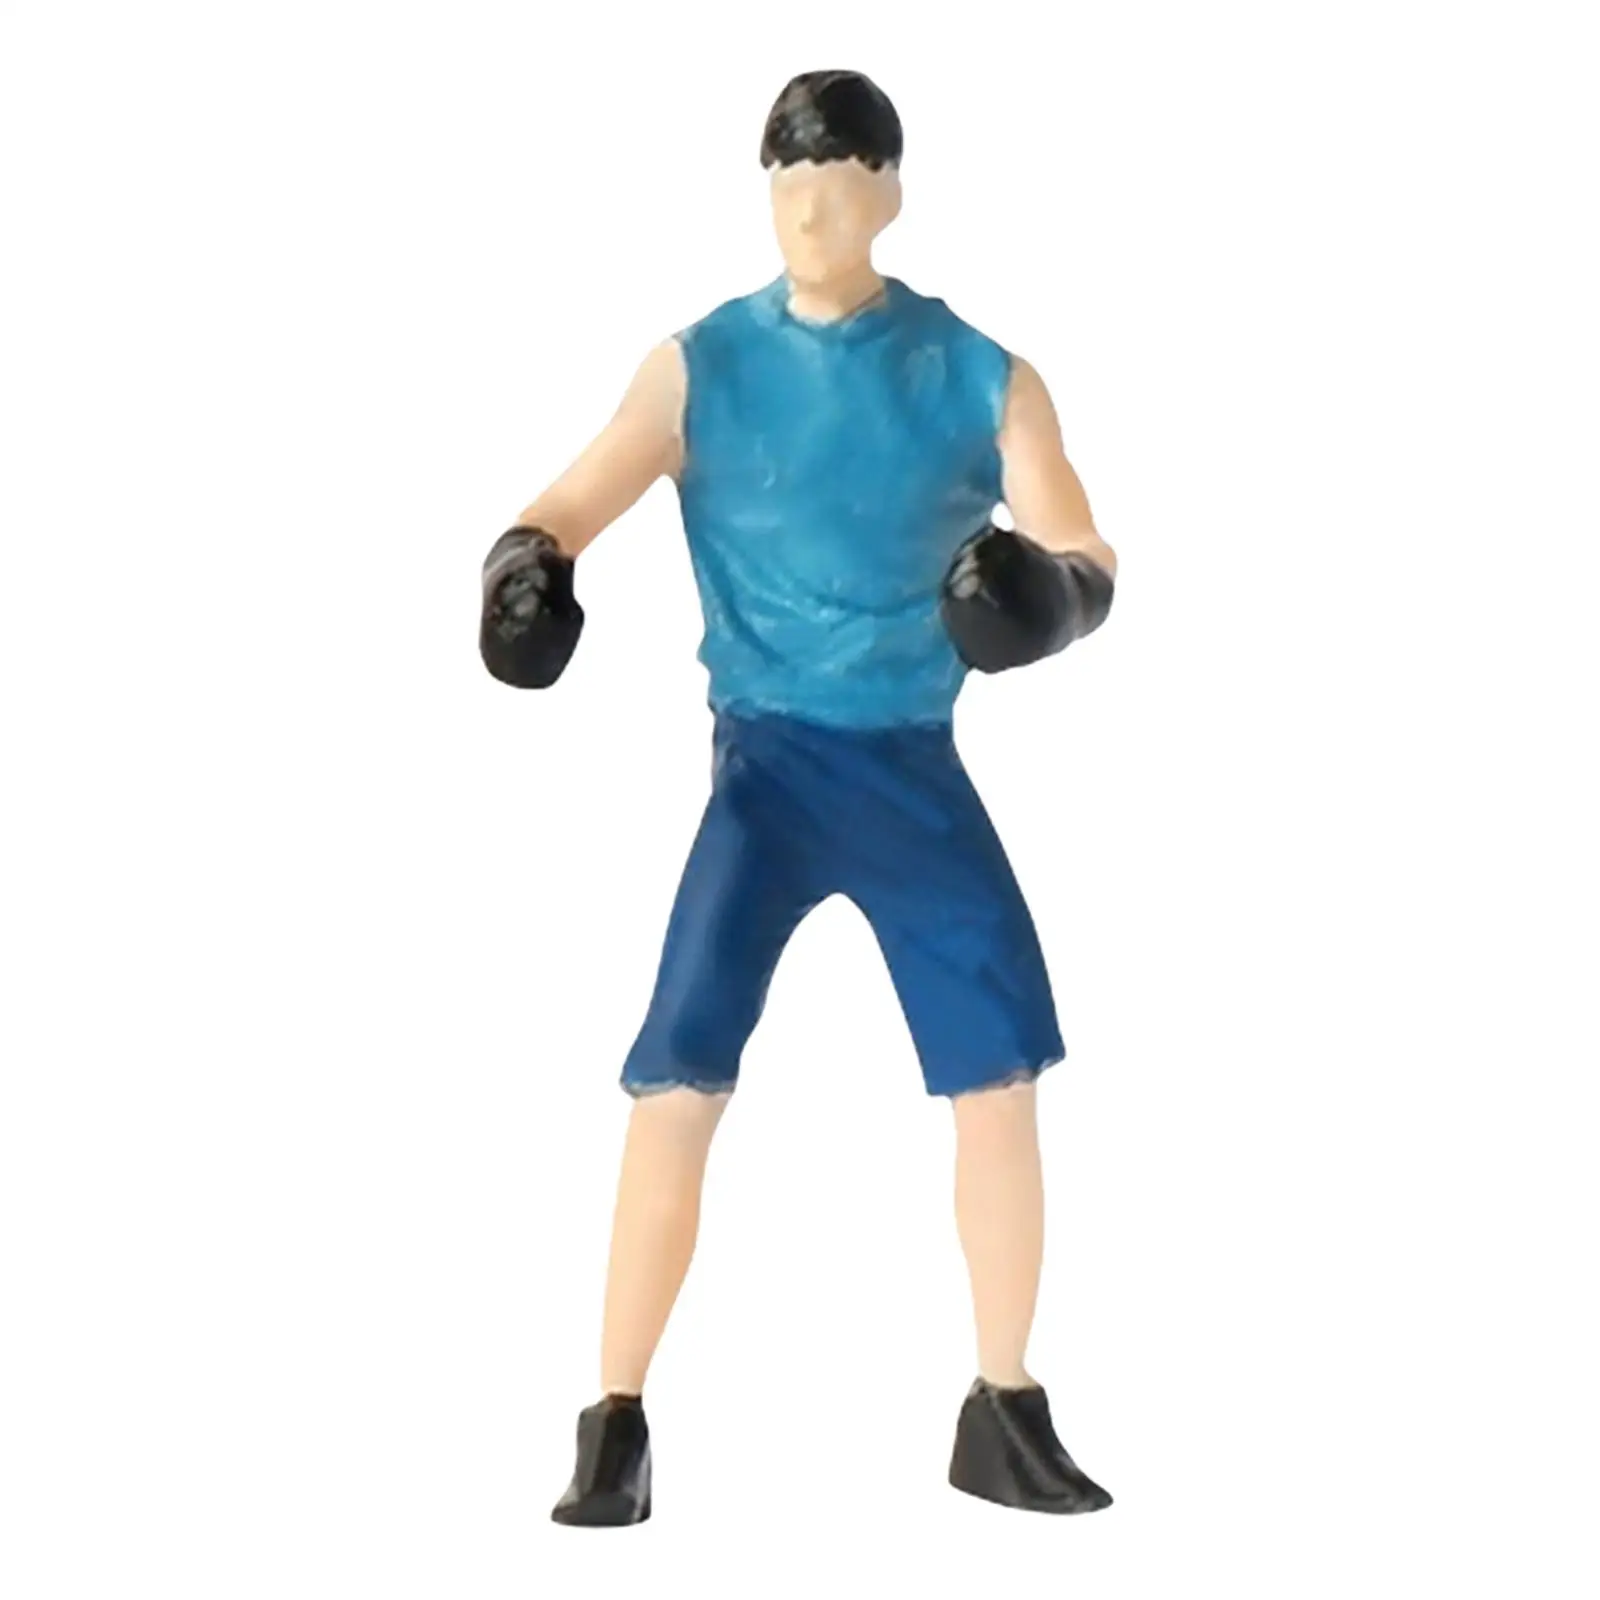 Simulation 1:64 Figures Boxing Man People Figures Resin Collection Mini Model for Photography Props Diorama Layout Decoration